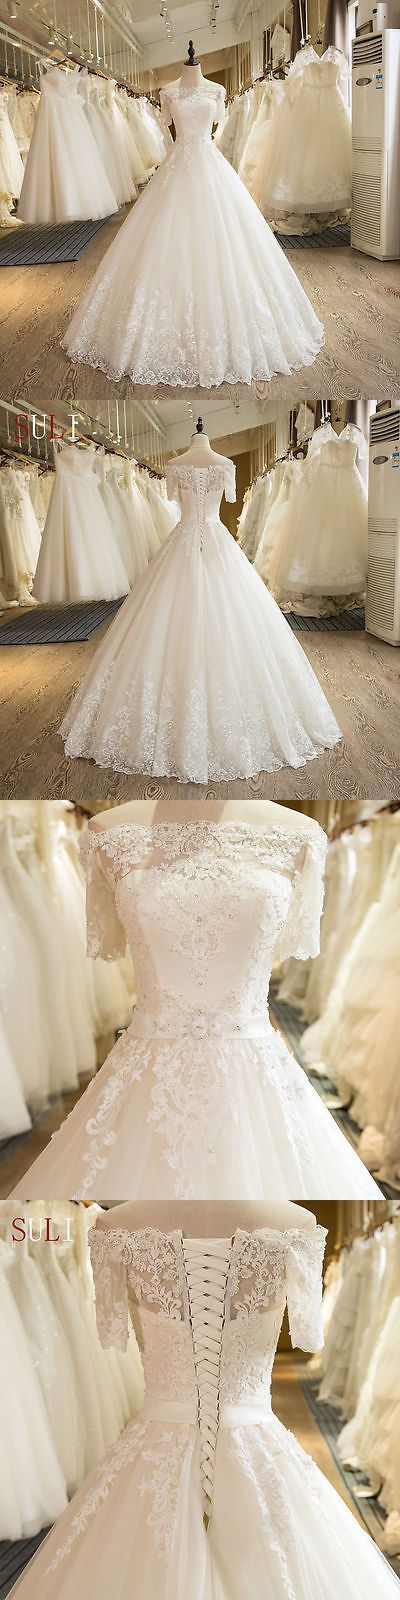 Charming White Lace A Line China Wedding Dress With Caped Sleeve Custom Made Bridal Gowns 2020